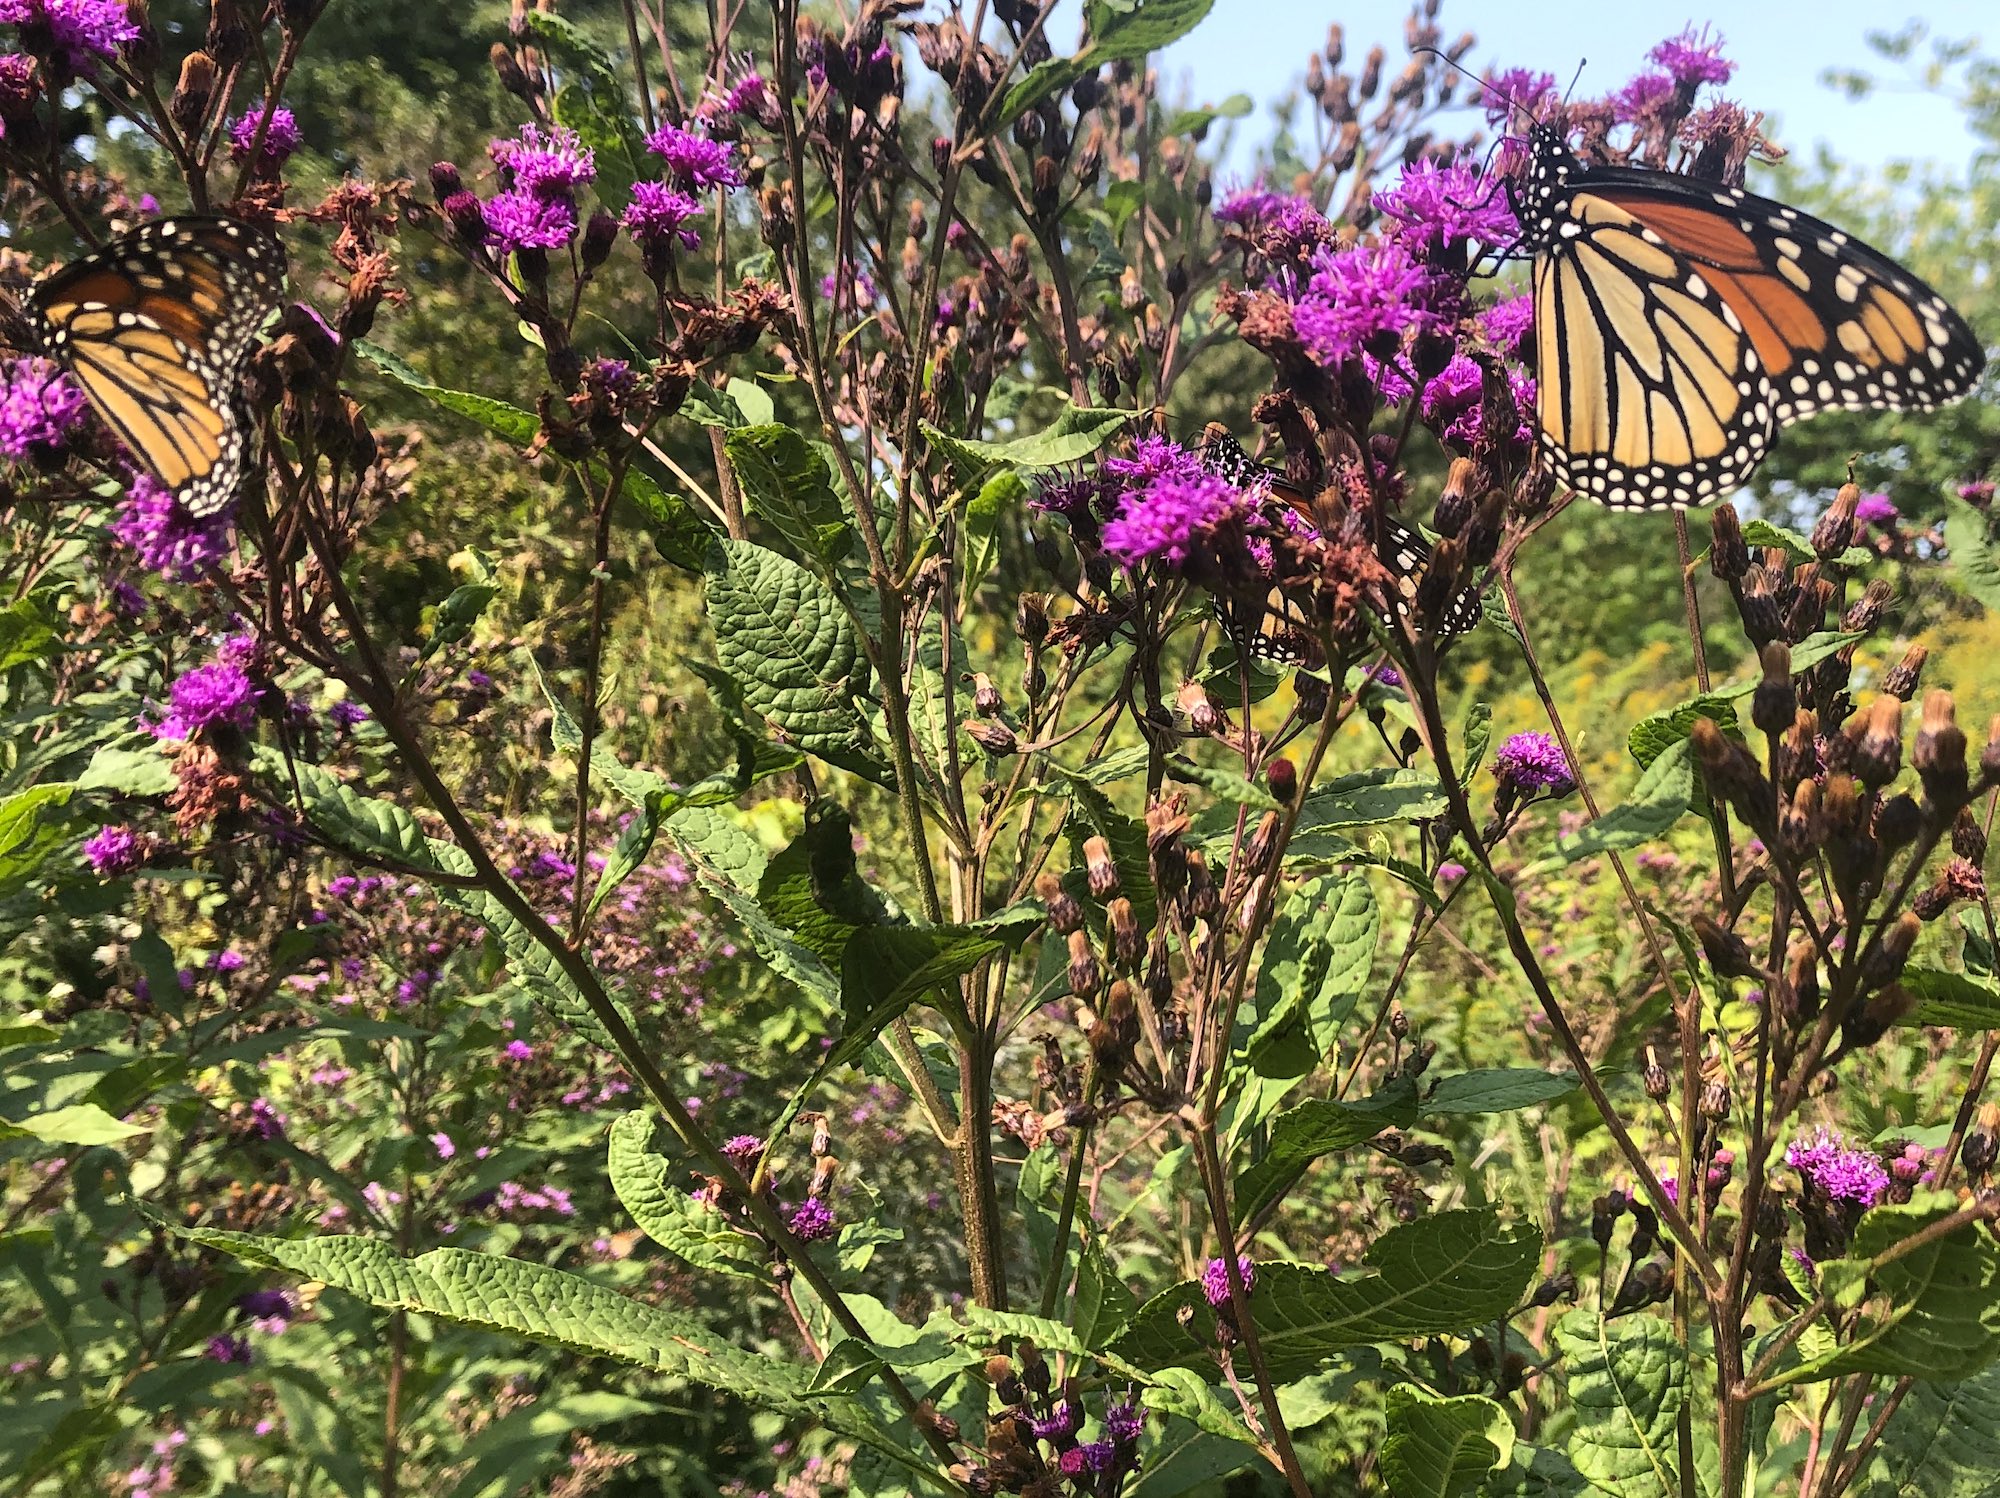 Tall Ironweed in drainage ditch along bikepath between Midvale Blvd. and the Beltline on September 15, 2020.